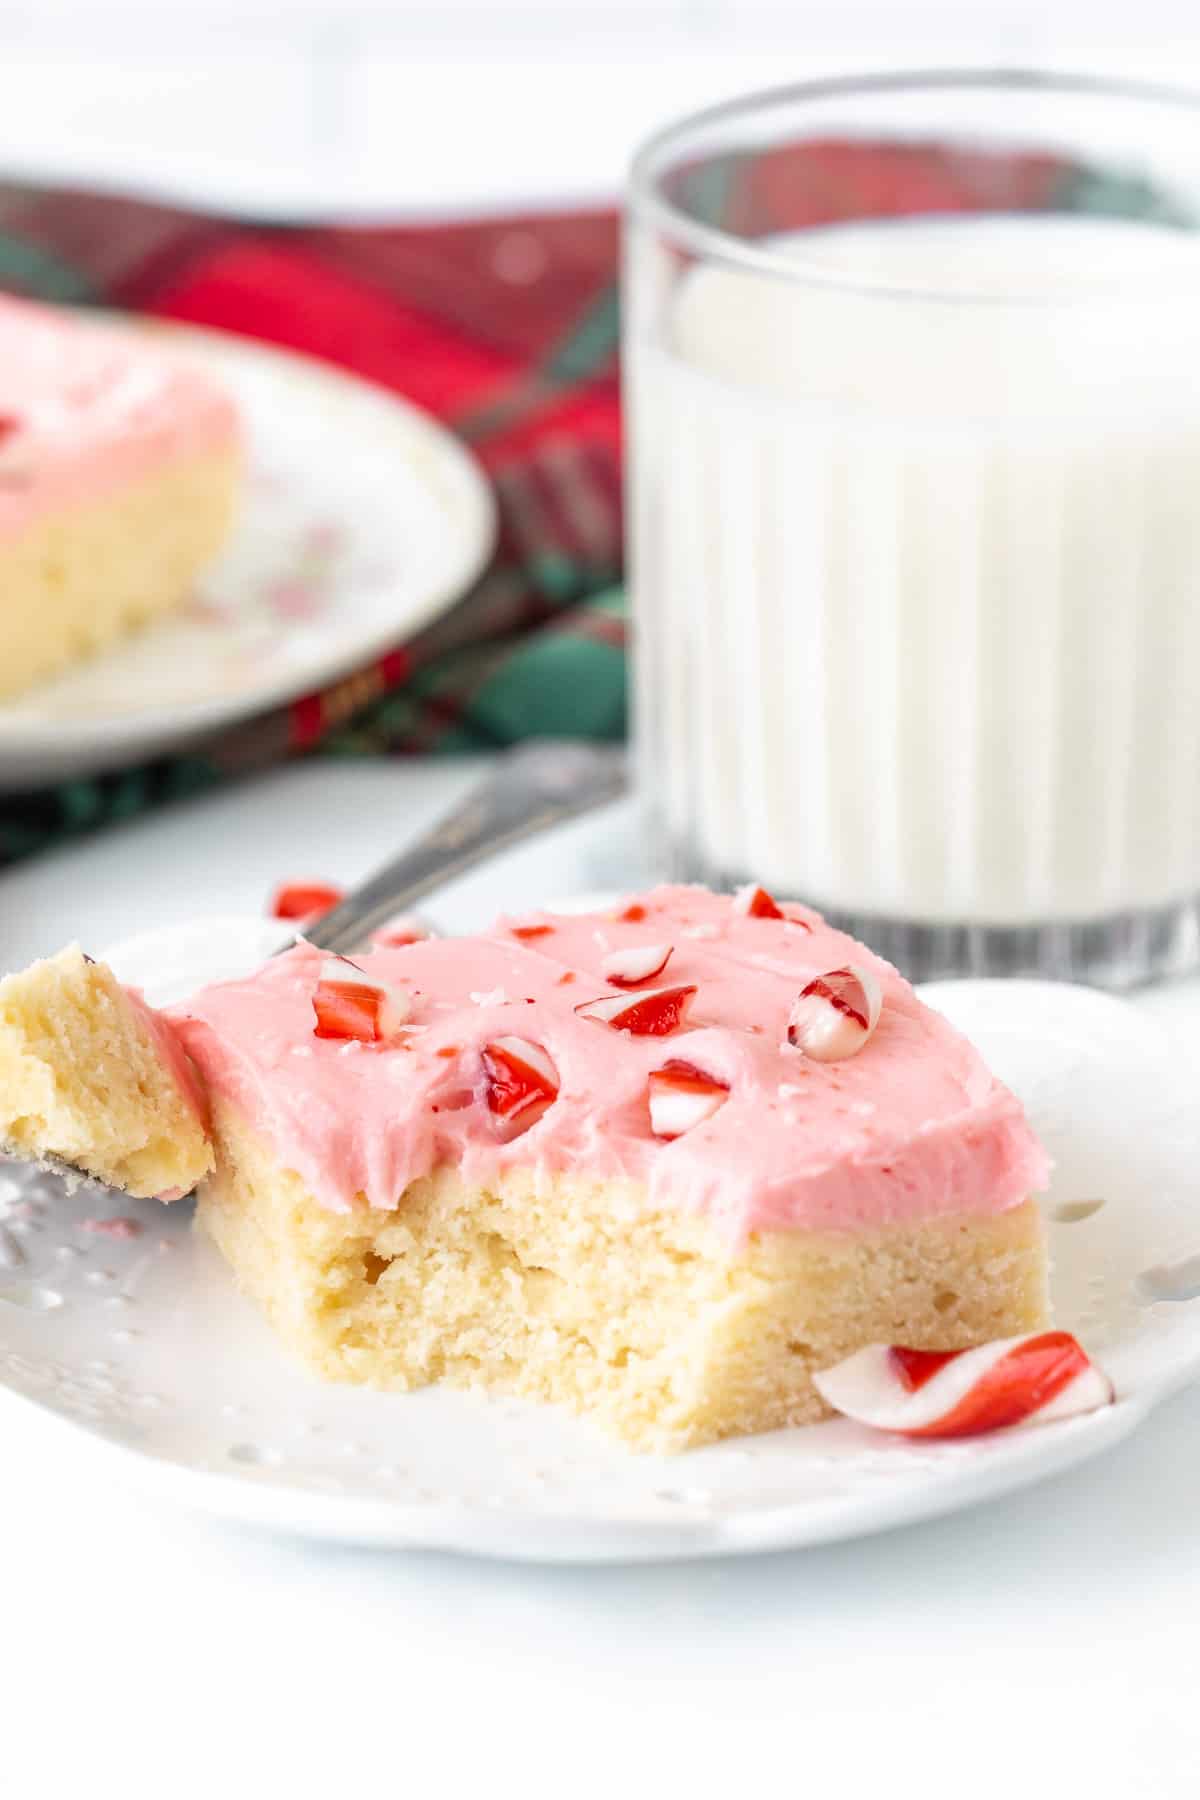 Candy cane sugar cookie bar with bite taken out, with glass of milk